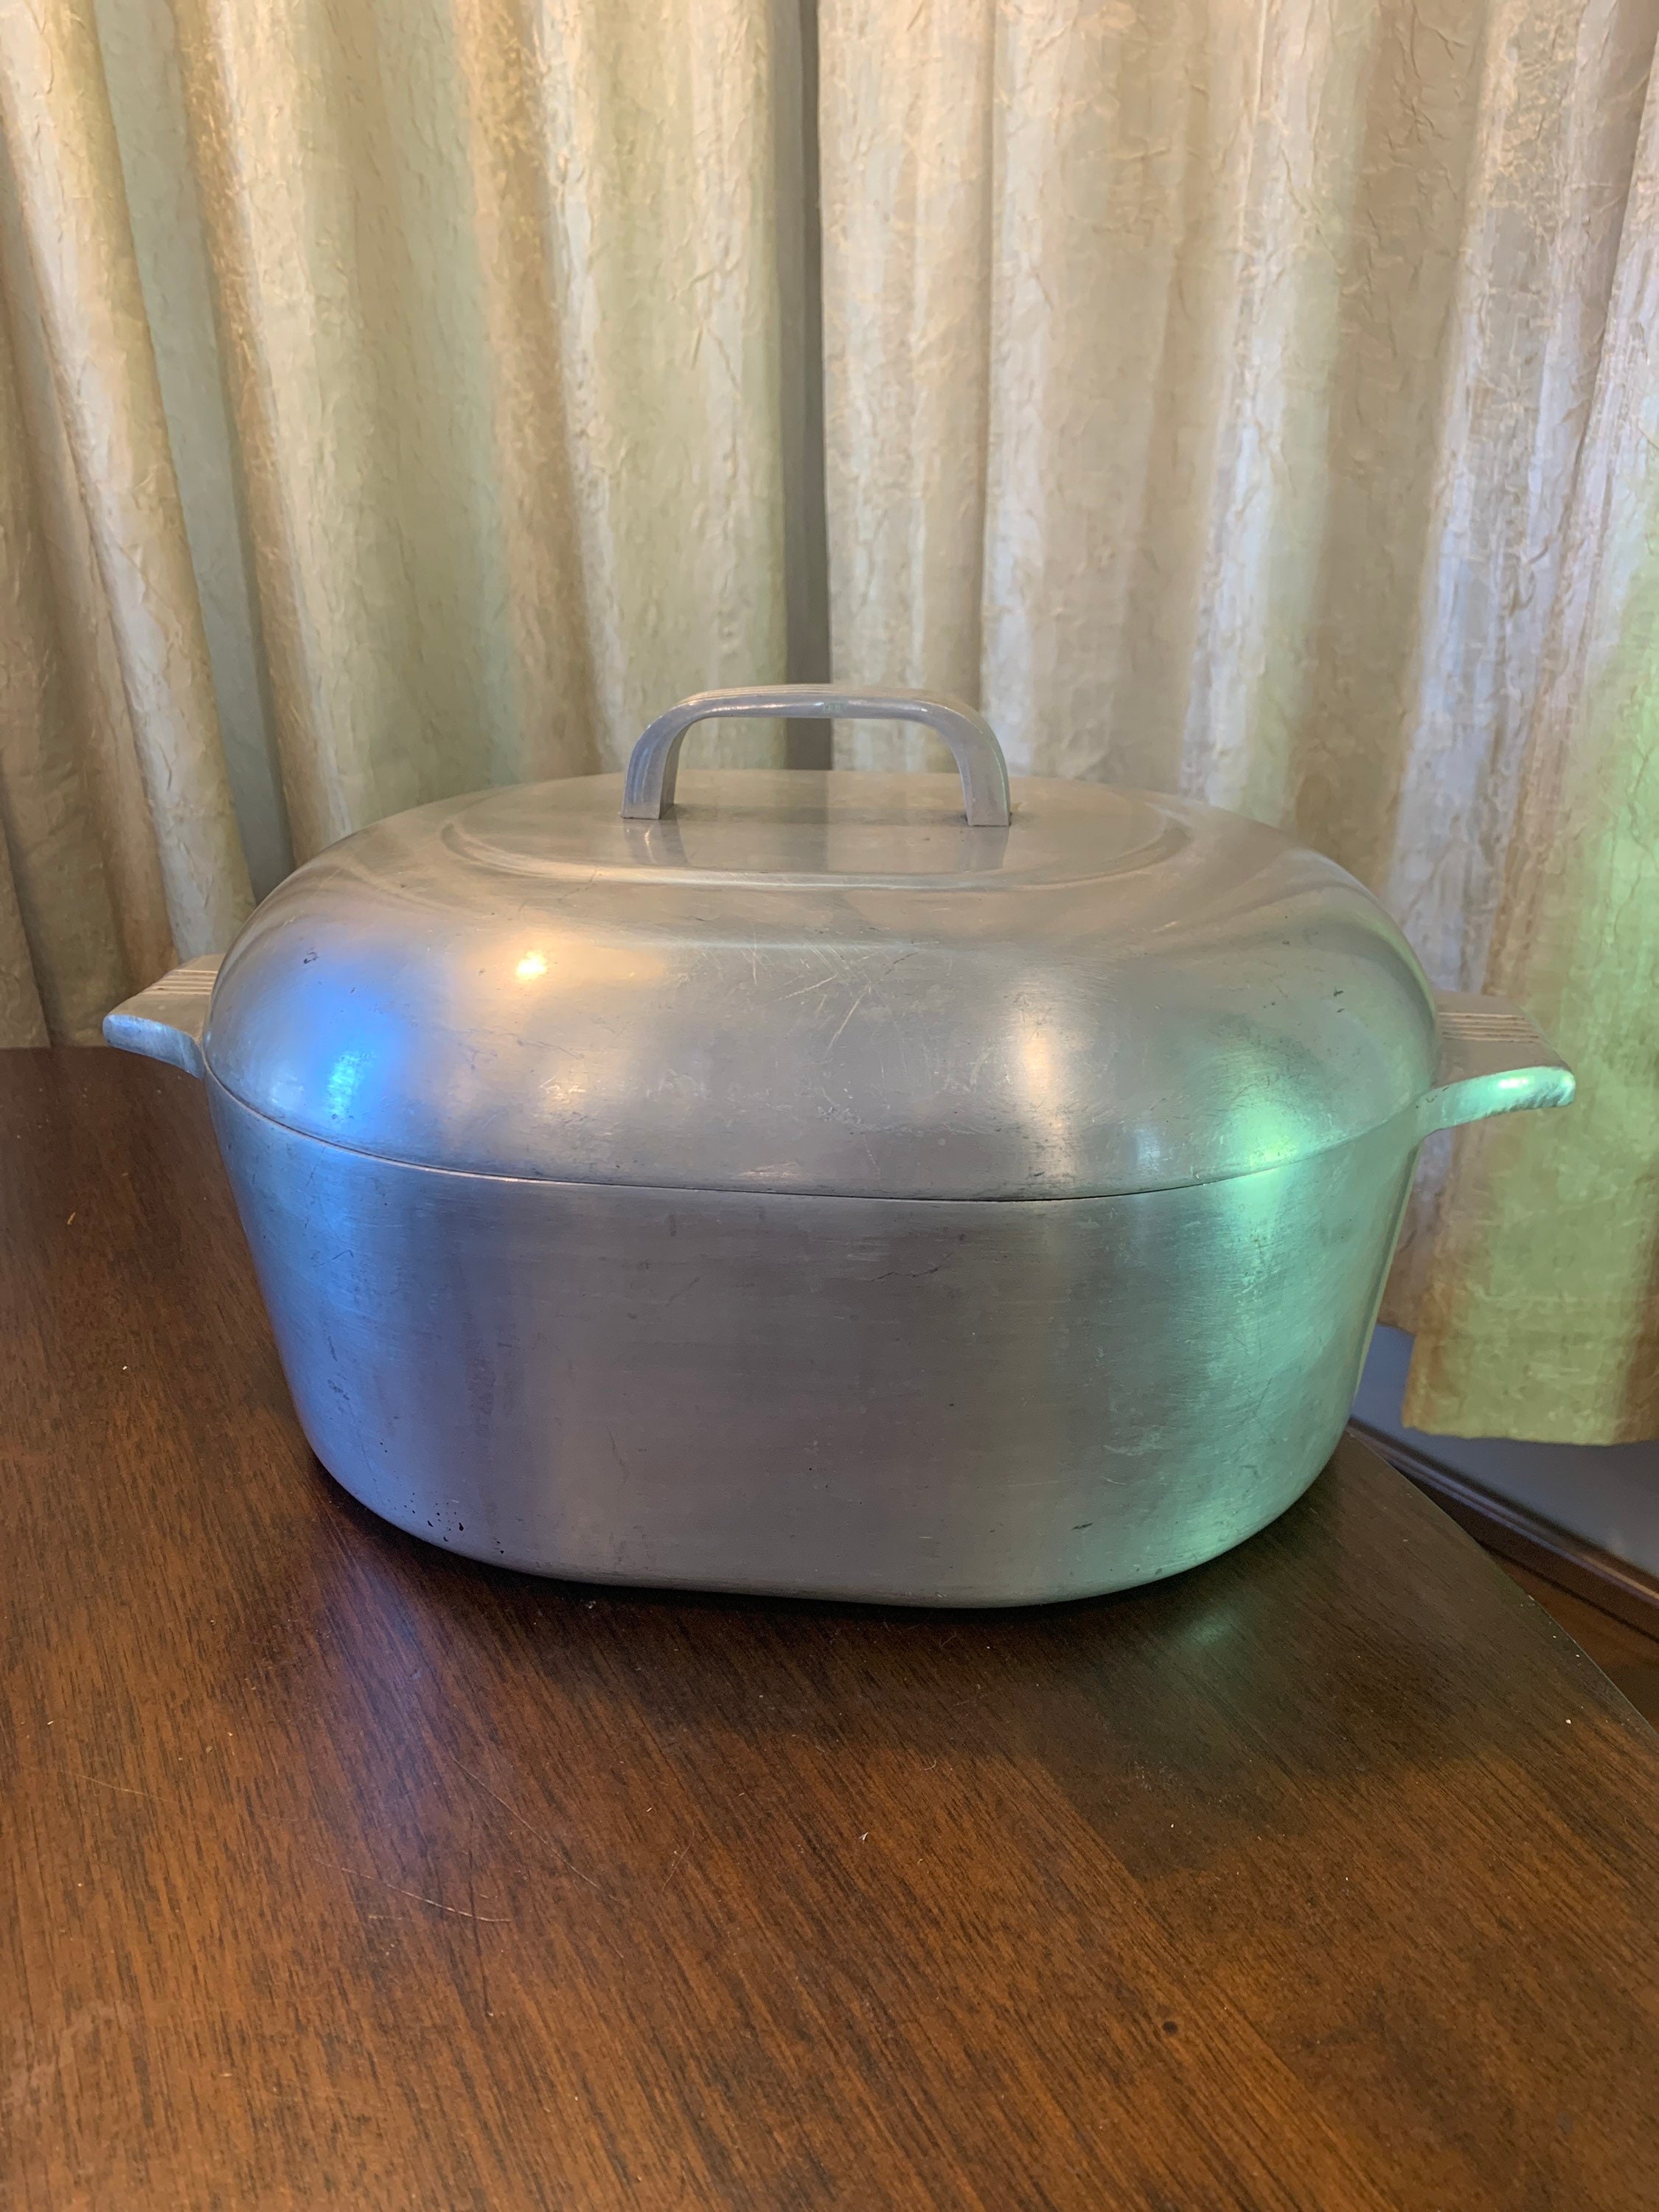 Wagner Ware Magnalite Sidney 8 Quart Roaster With Self Basting 